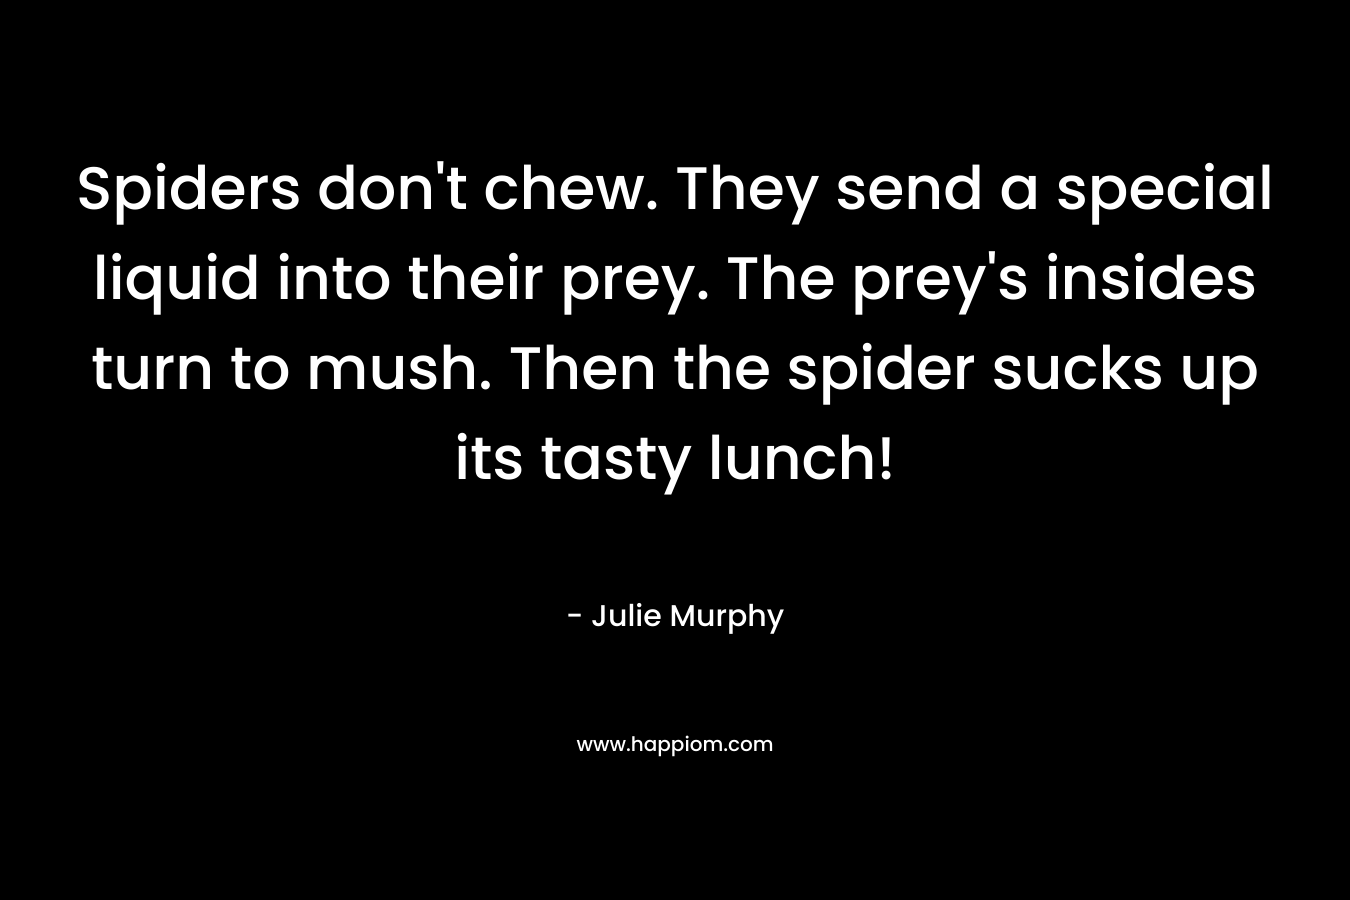 Spiders don’t chew. They send a special liquid into their prey. The prey’s insides turn to mush. Then the spider sucks up its tasty lunch! – Julie  Murphy